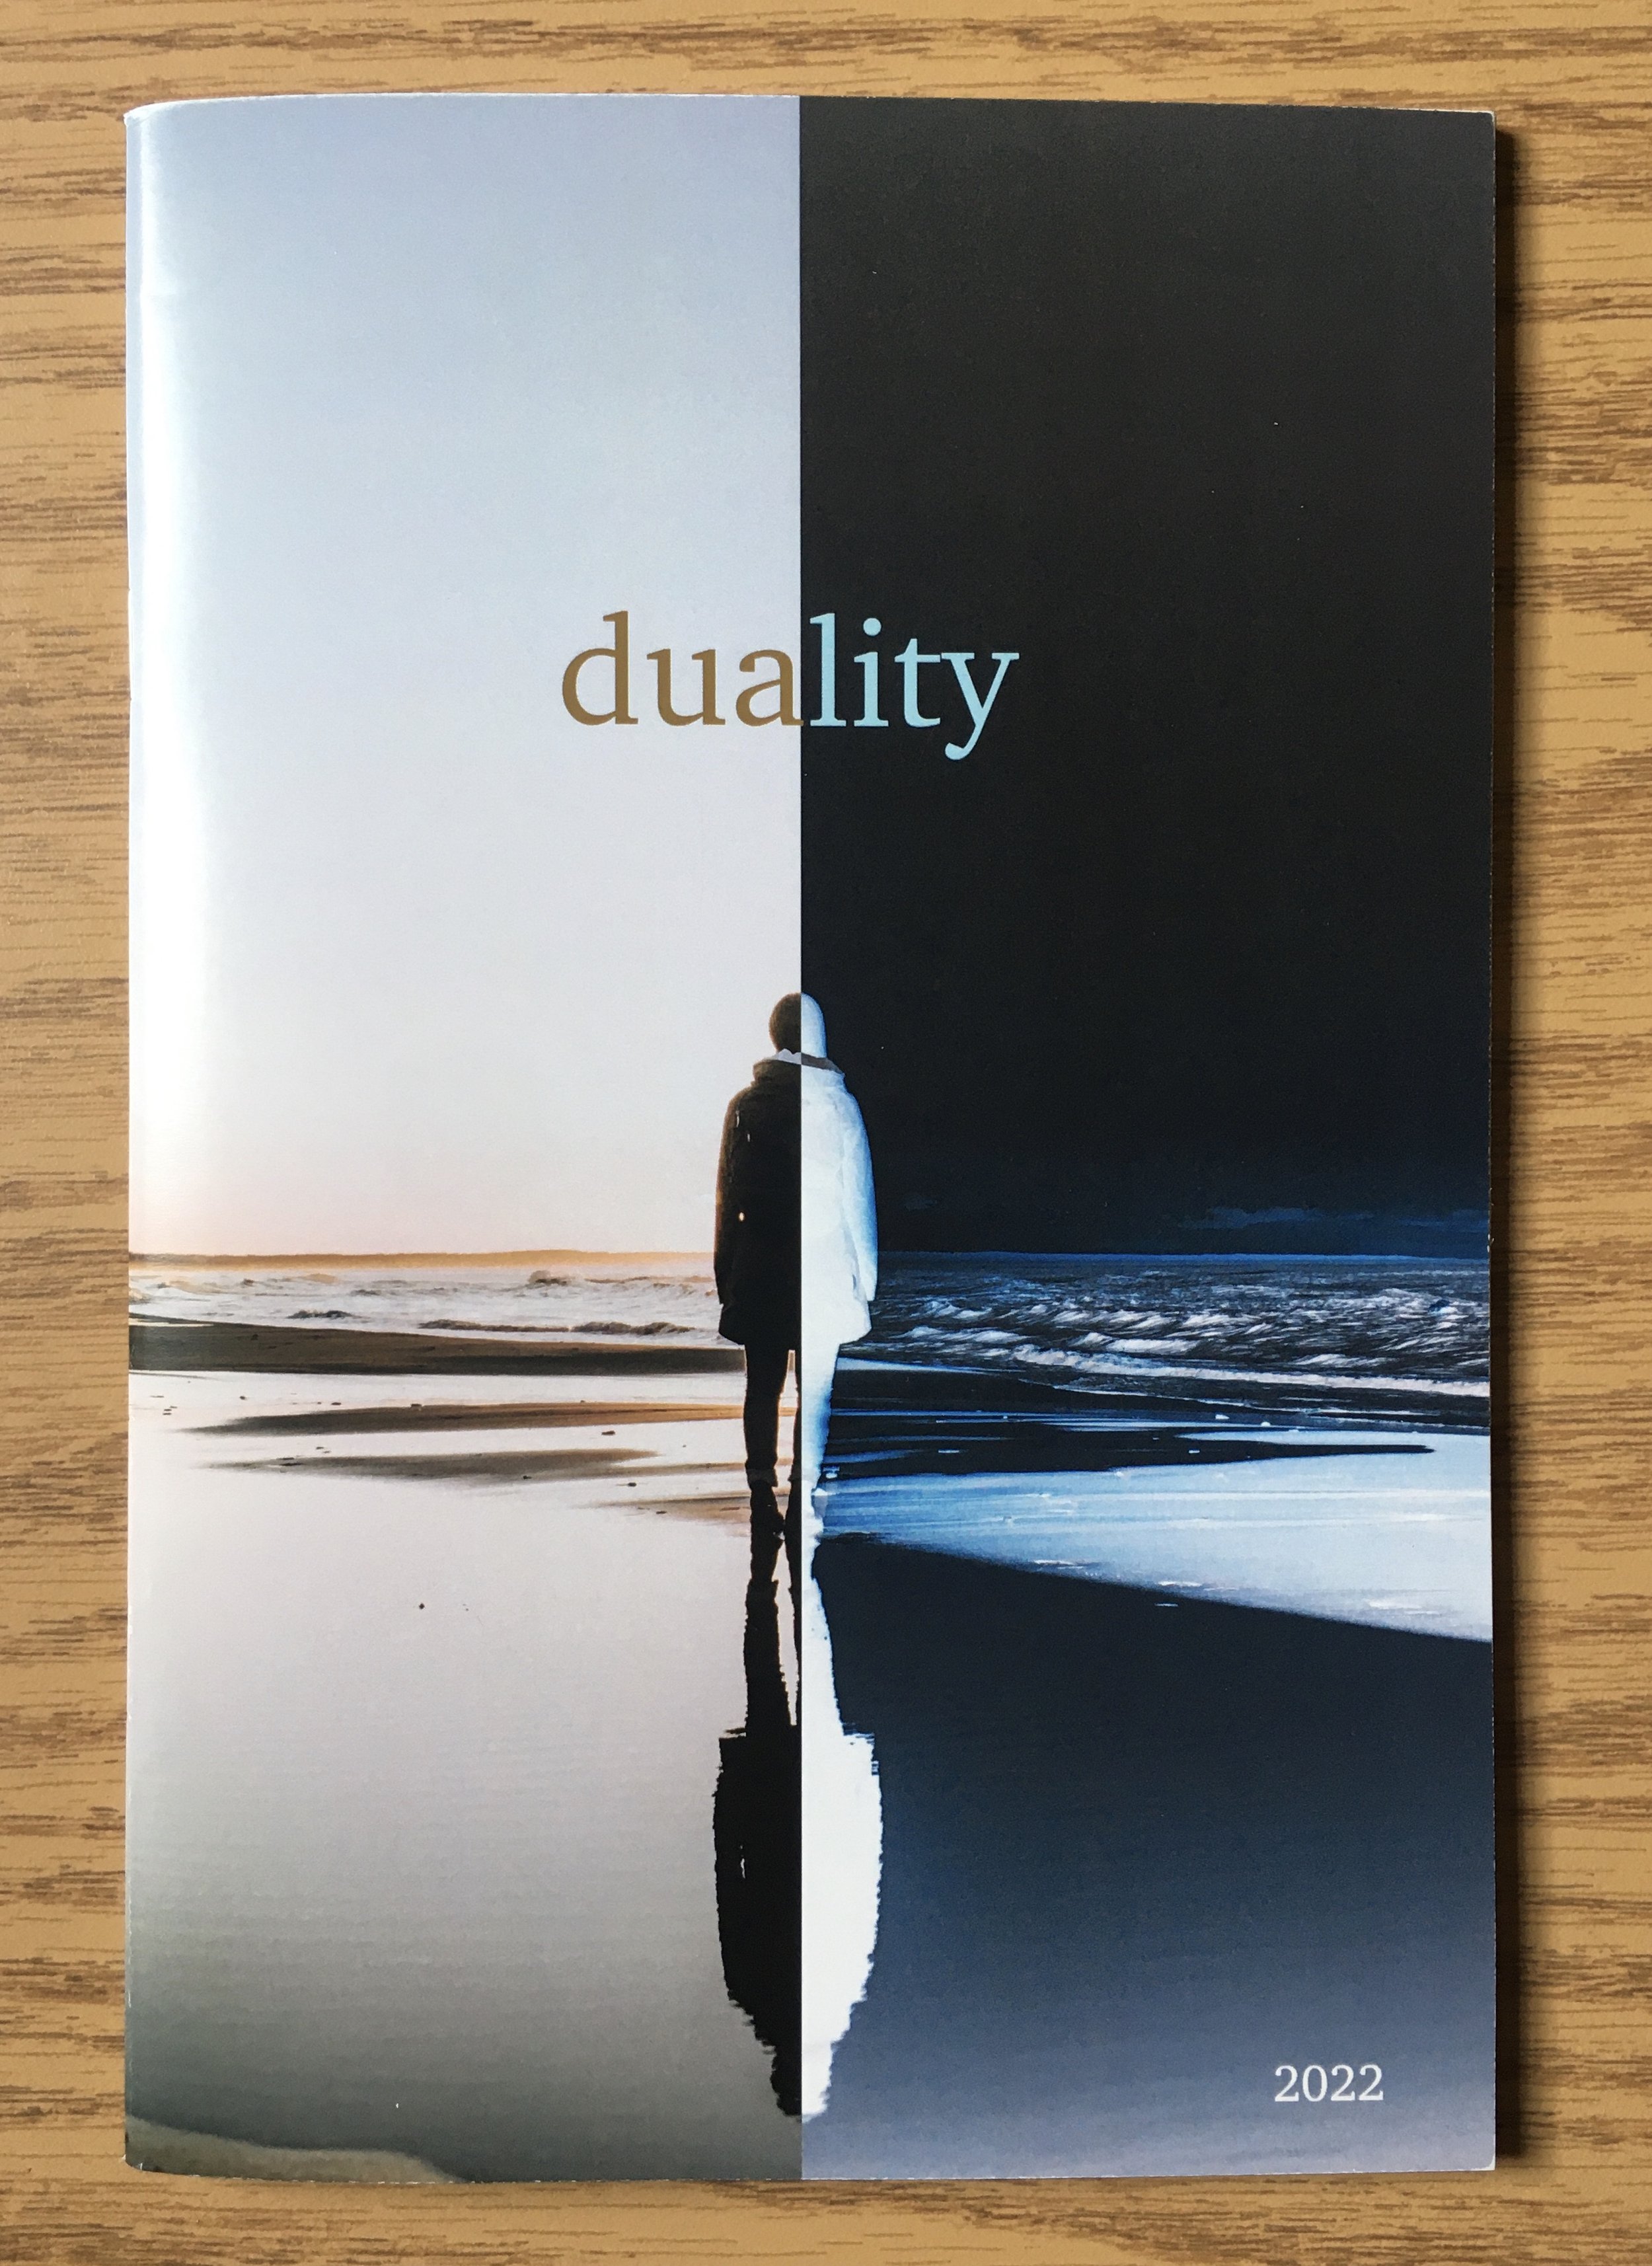 duality journal cover.jpg